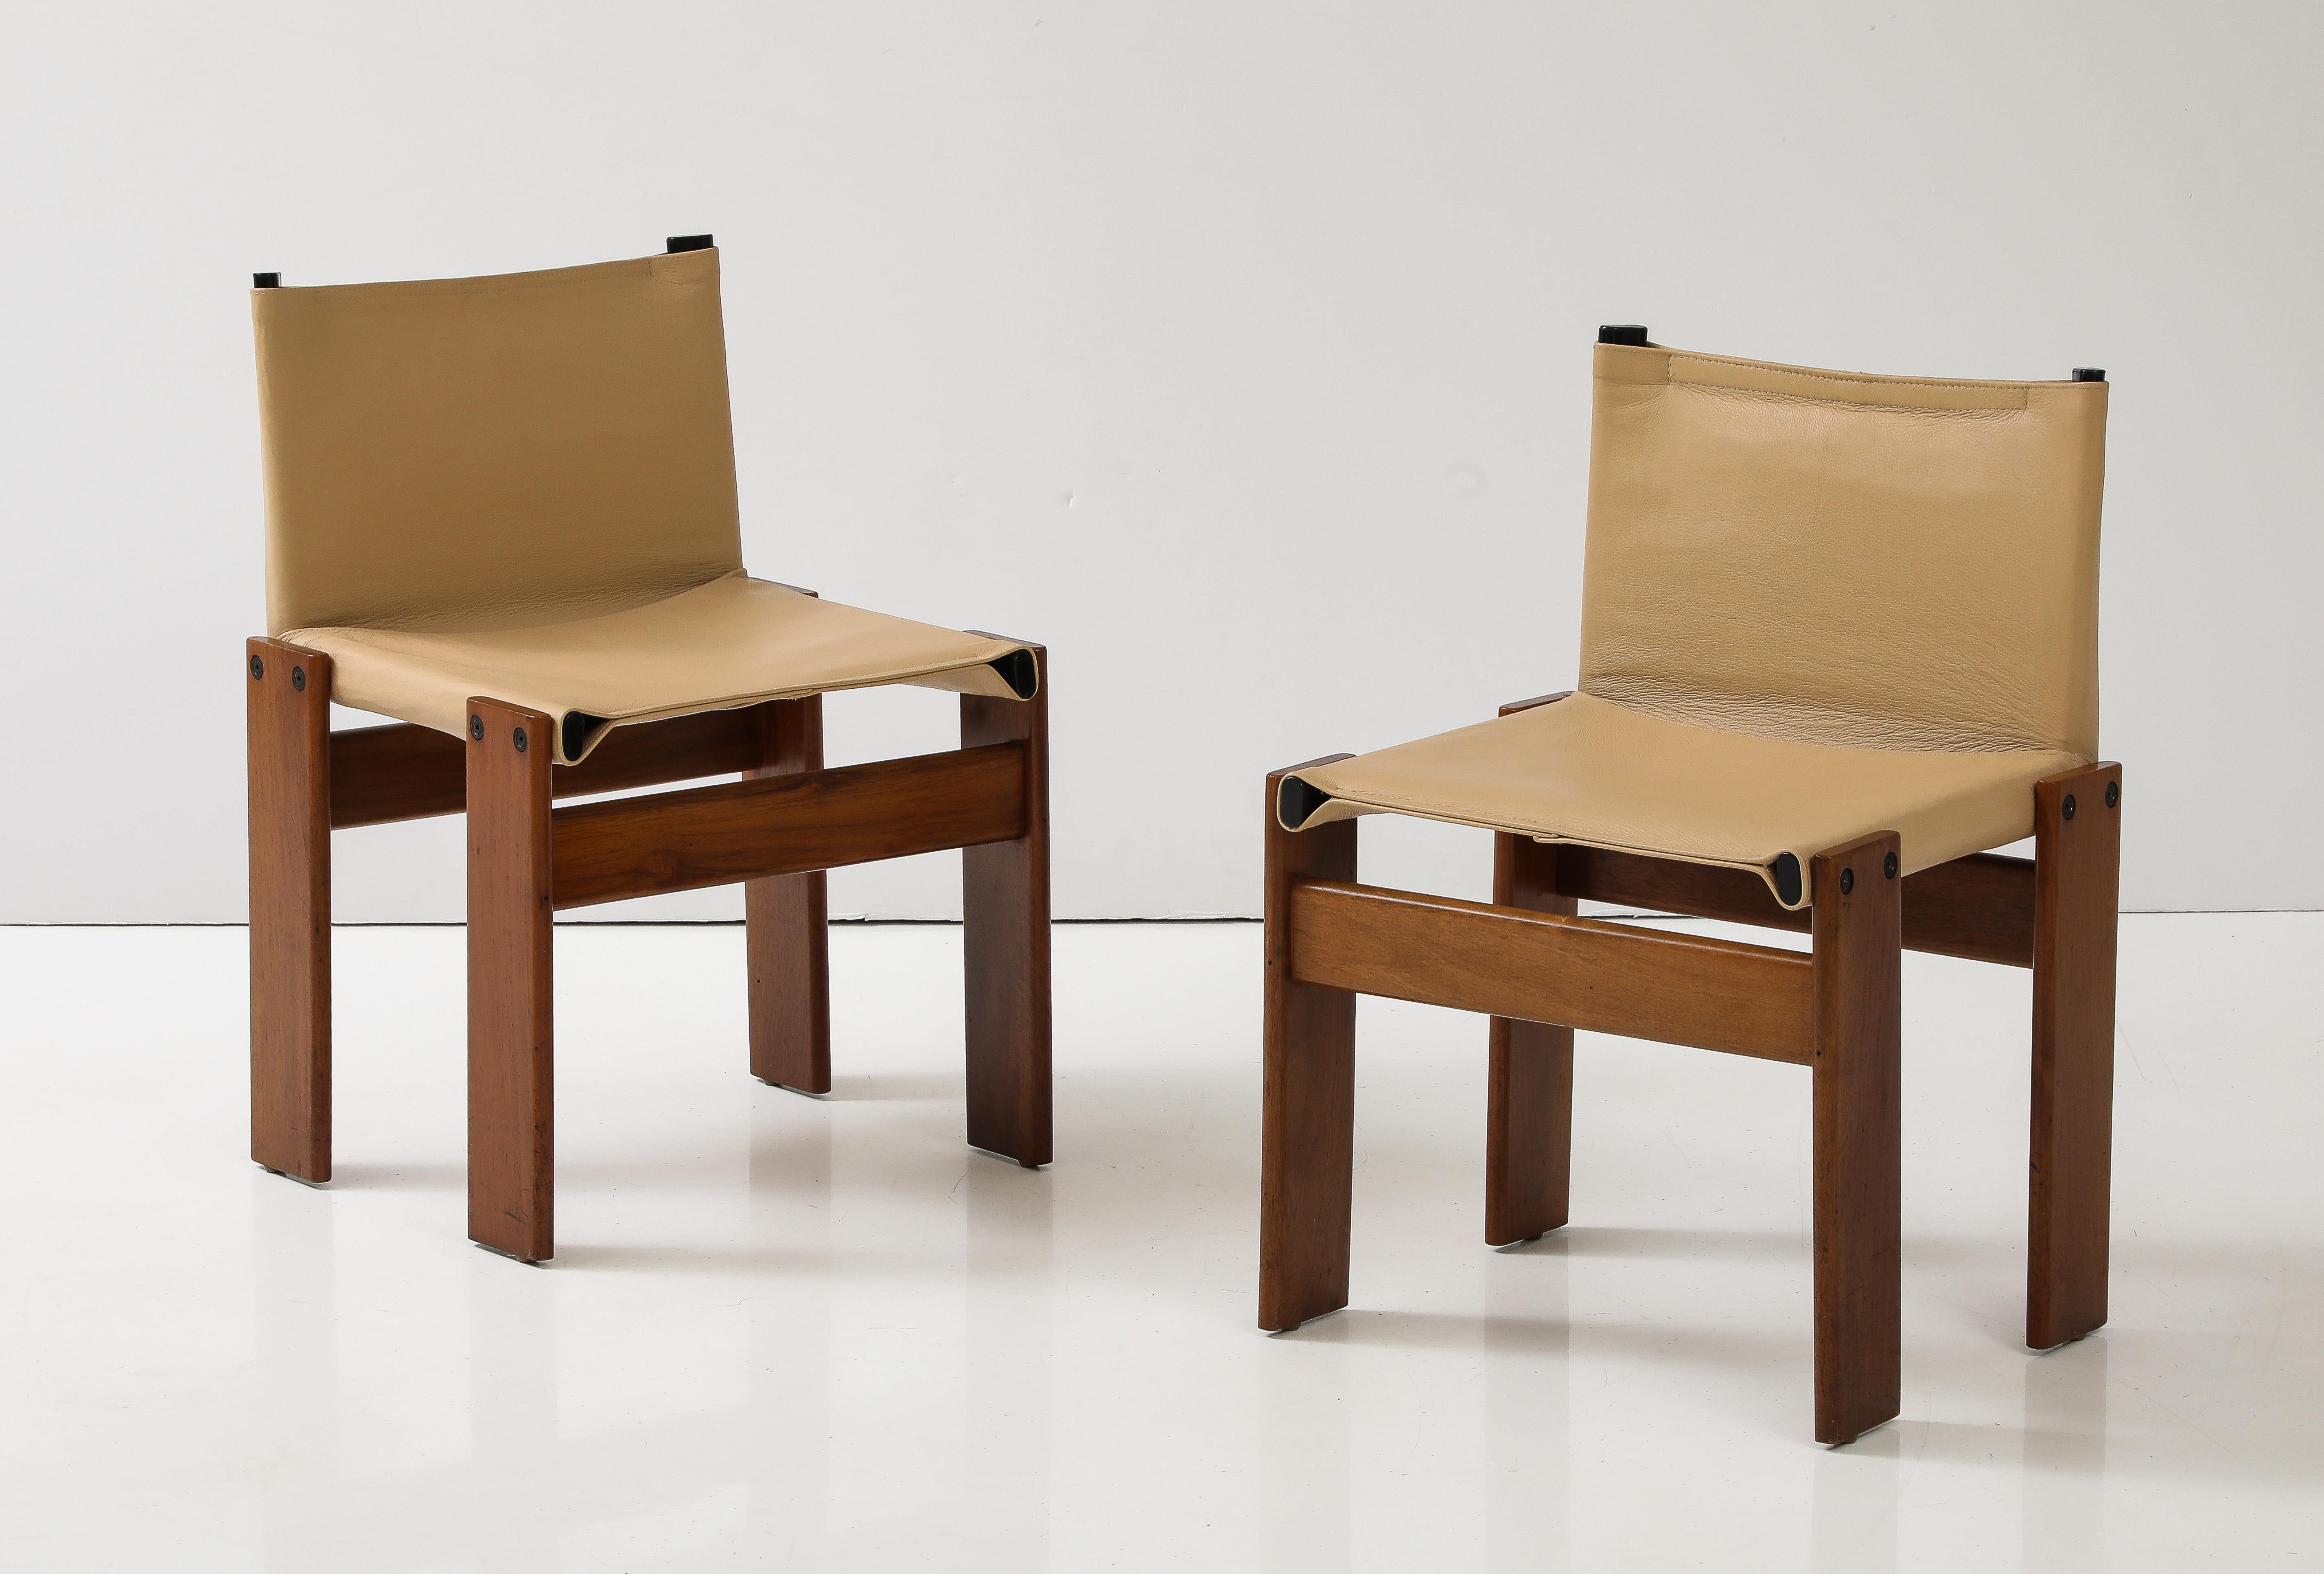 Afra and Tobia Scarpa Pair of 'Monk' Chairs for Molteni, Italy, circa 1974  In Good Condition For Sale In New York, NY